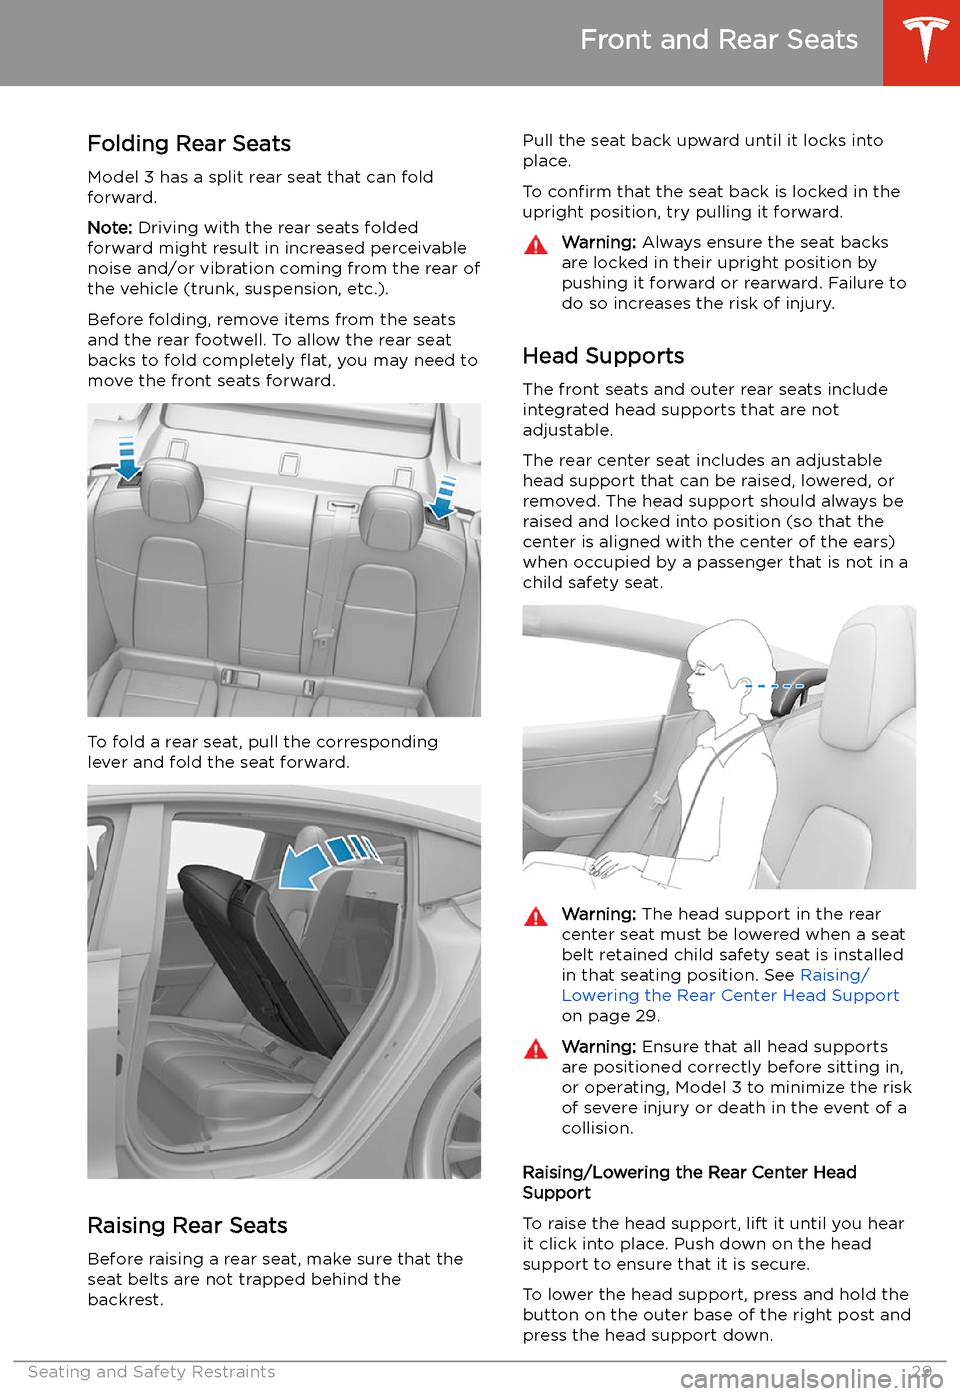 TESLA MODEL 3 2020  s Owners Guide Folding Rear Seats
Model 3 has a split rear seat that can fold
forward.
Note:  Driving with the rear seats folded
forward might result in increased perceivable
noise and/or vibration coming from the r